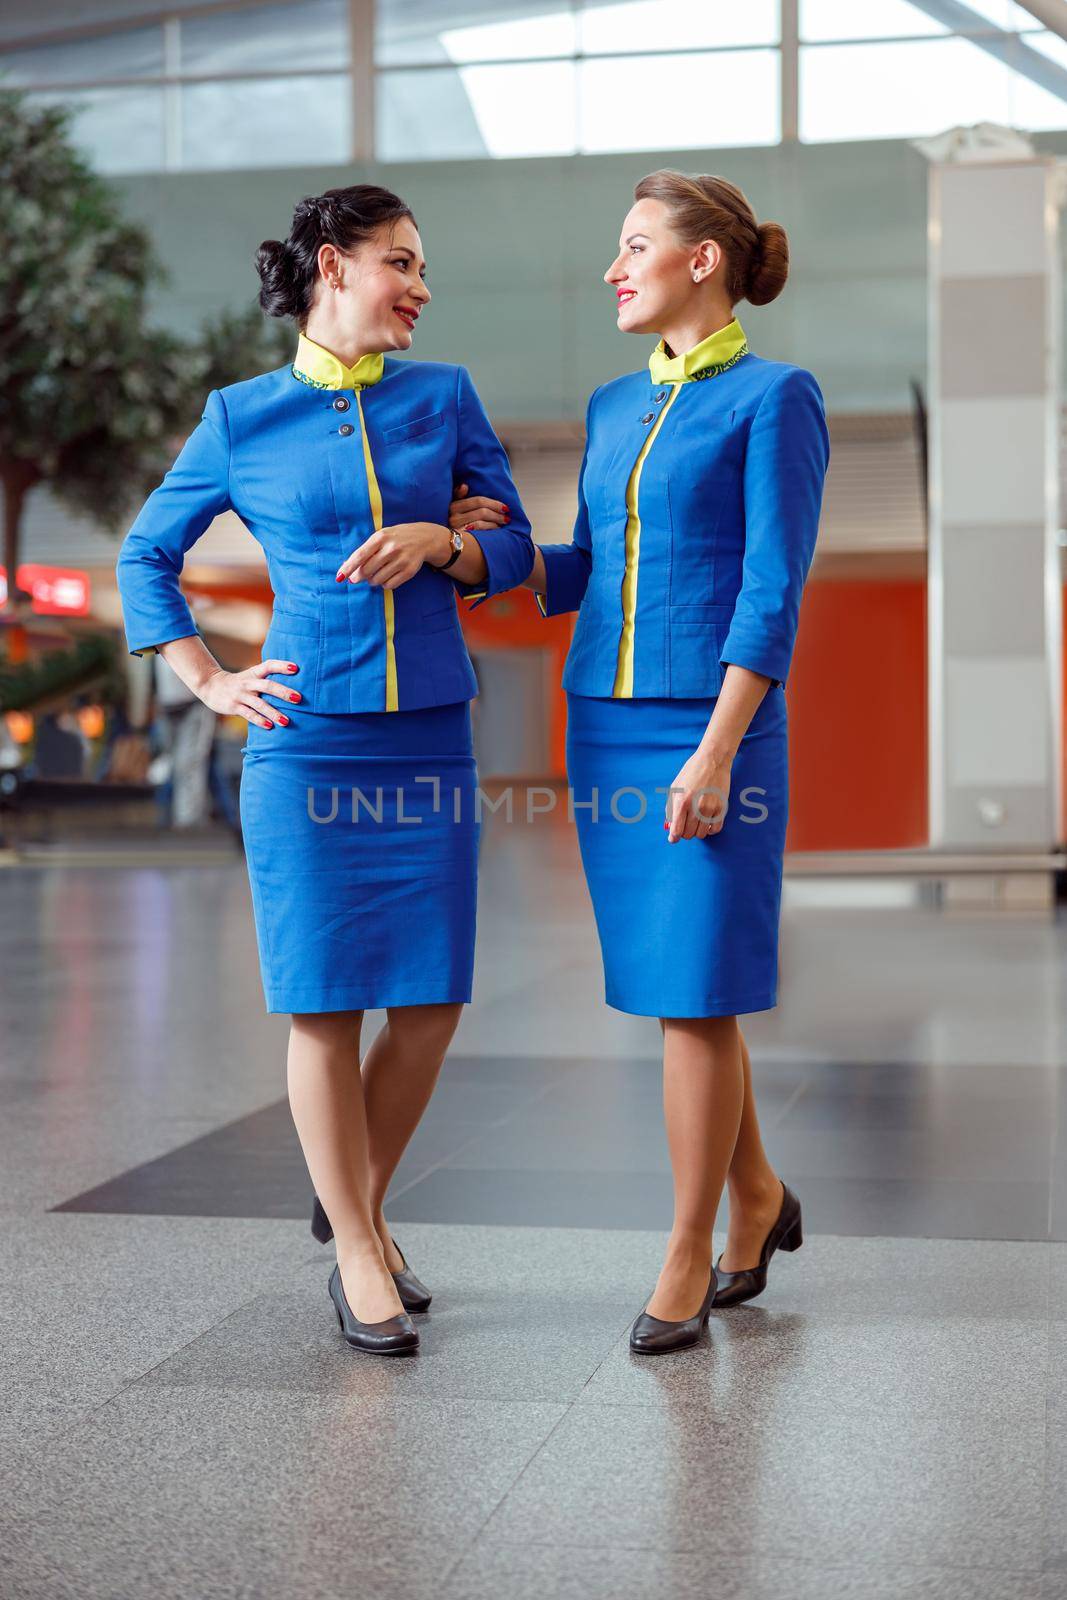 Full length of joyful woman flight attendant in aviation uniform looking at air hostess colleague and smiling while holding her arm